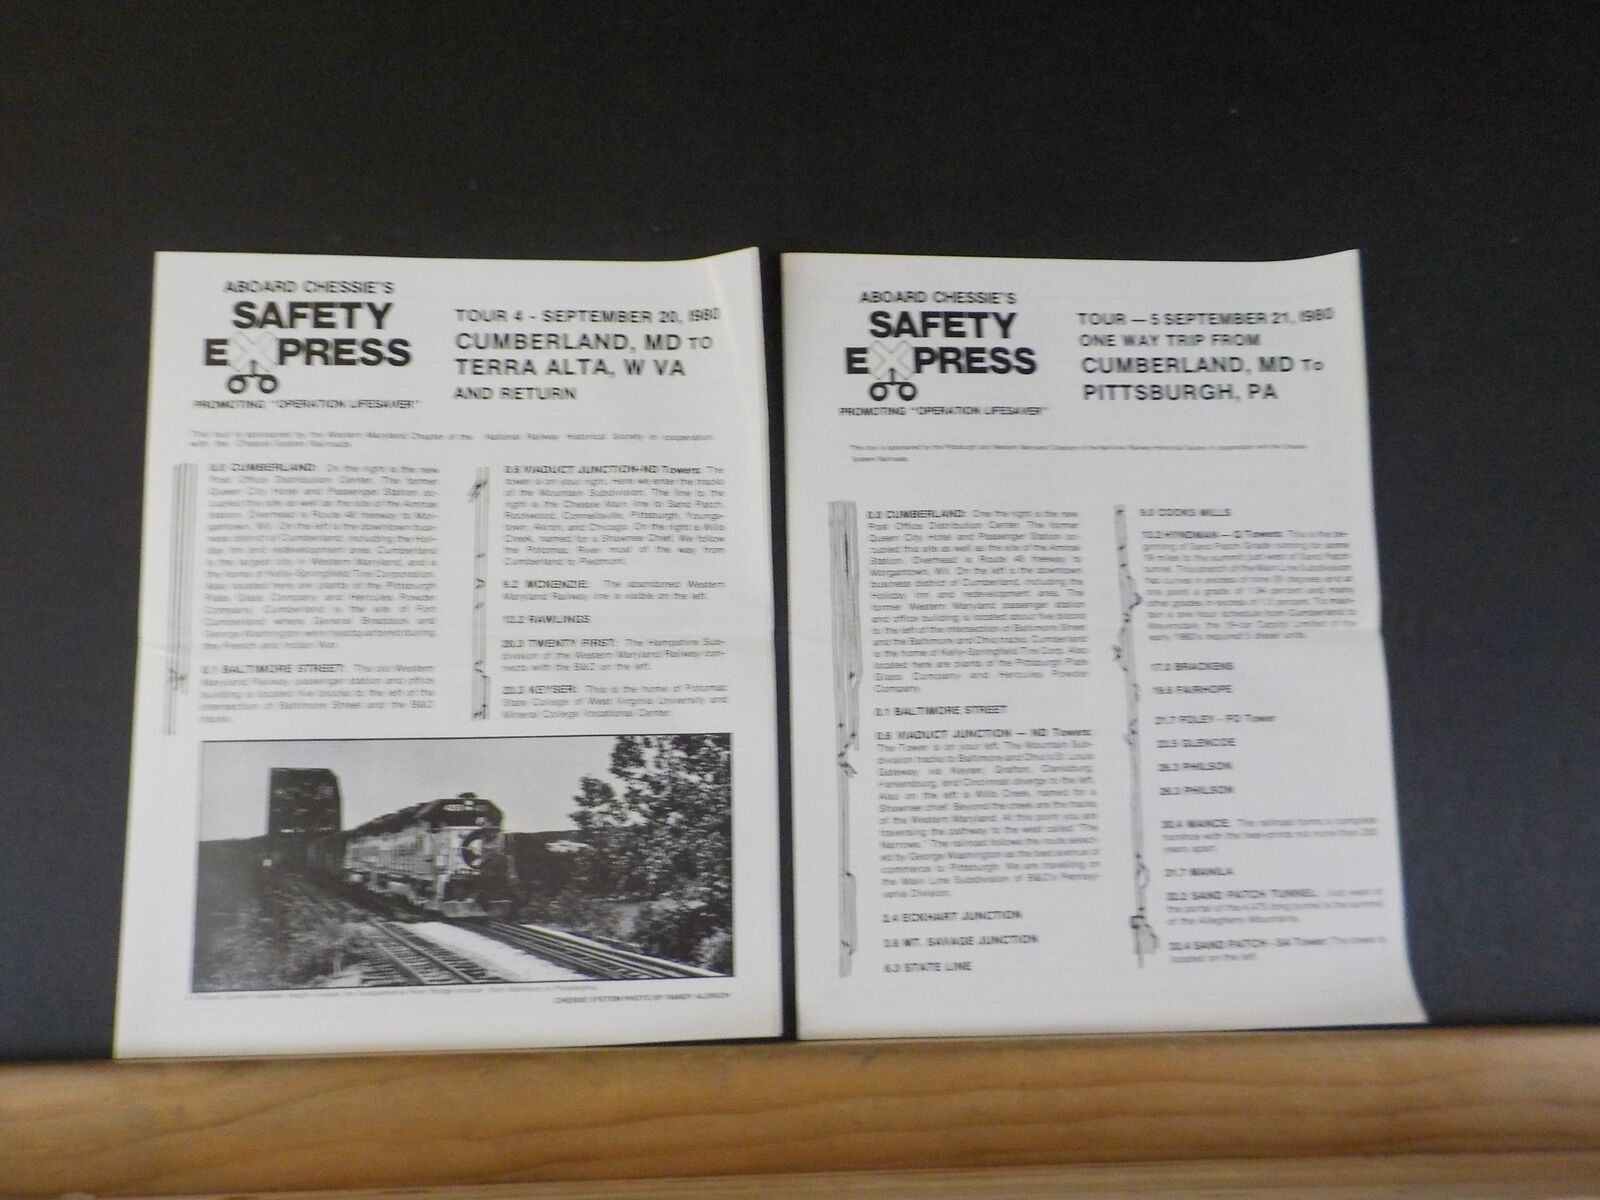 Aboard Chessie’s Safety Express LOT OF 2